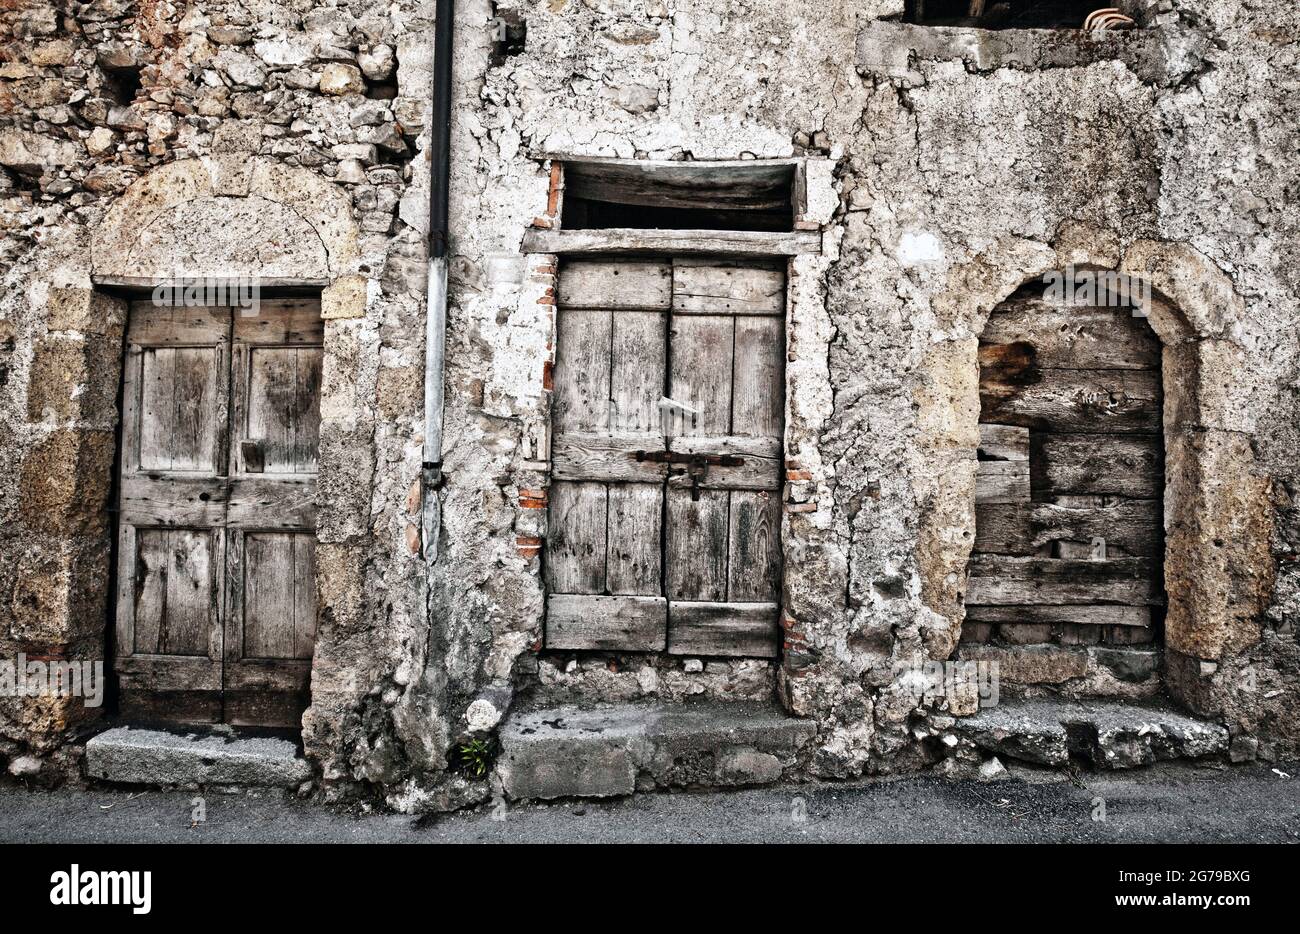 urban decay on quarry stone house with rotten wooden doors, Lombardy Stock Photo